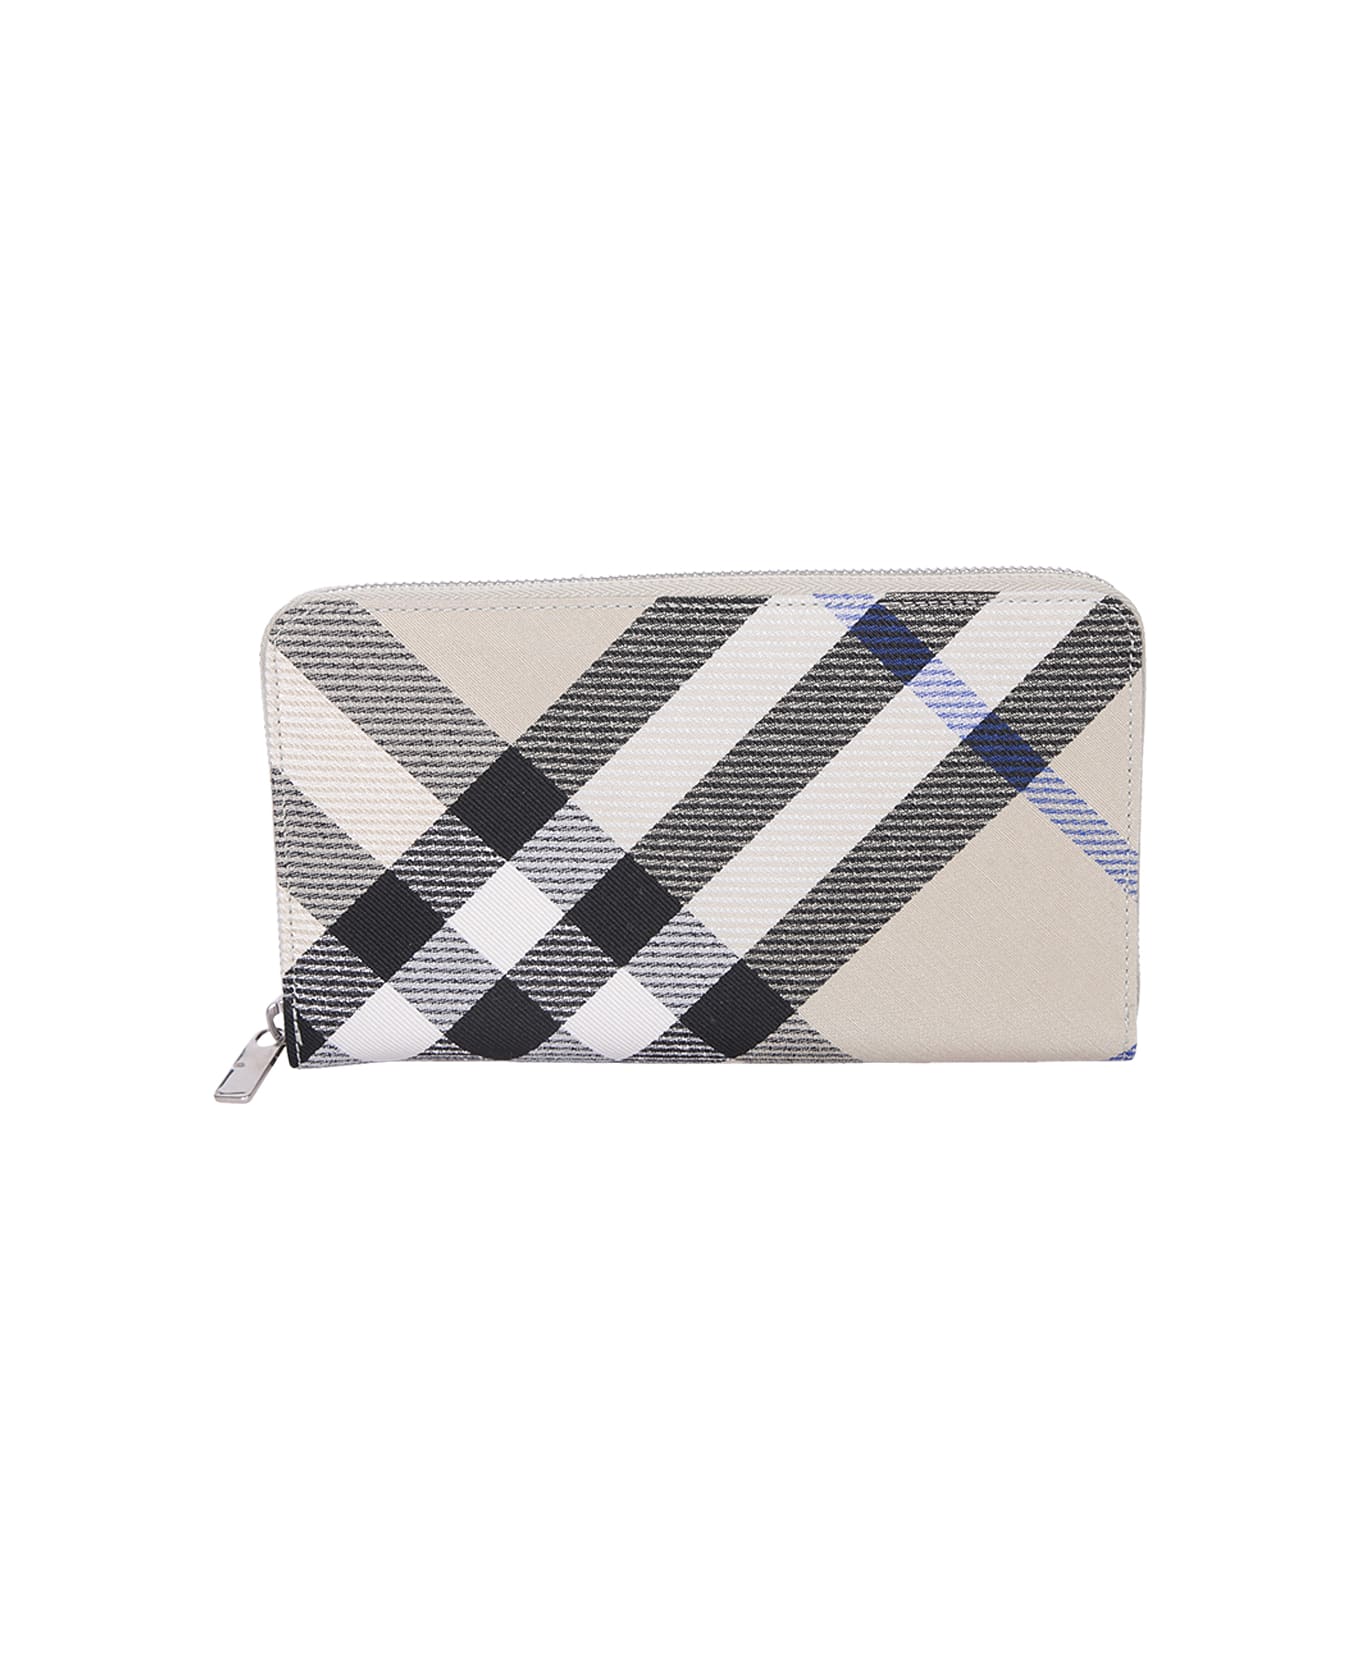 Burberry Large Checked Zip-around Wallet - White